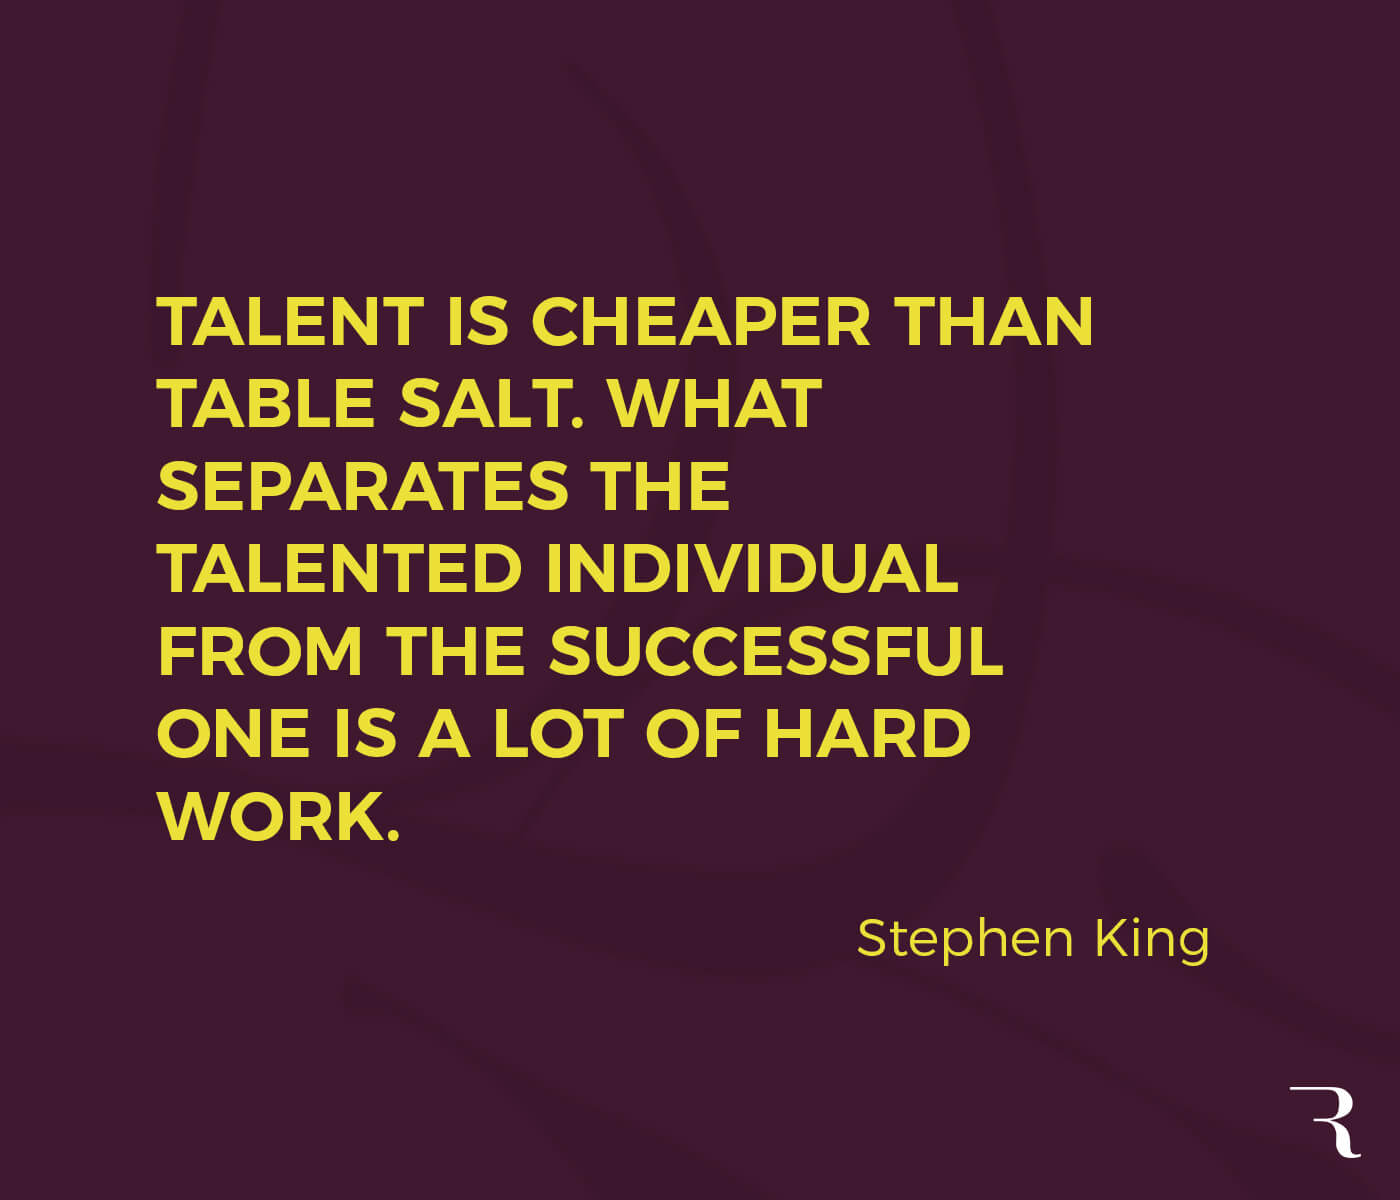 Motivational Quotes: "What separates talented individuals from successful ones, is a lot of hard work." 112 Motivational Quotes to Be a Better Entrepreneur